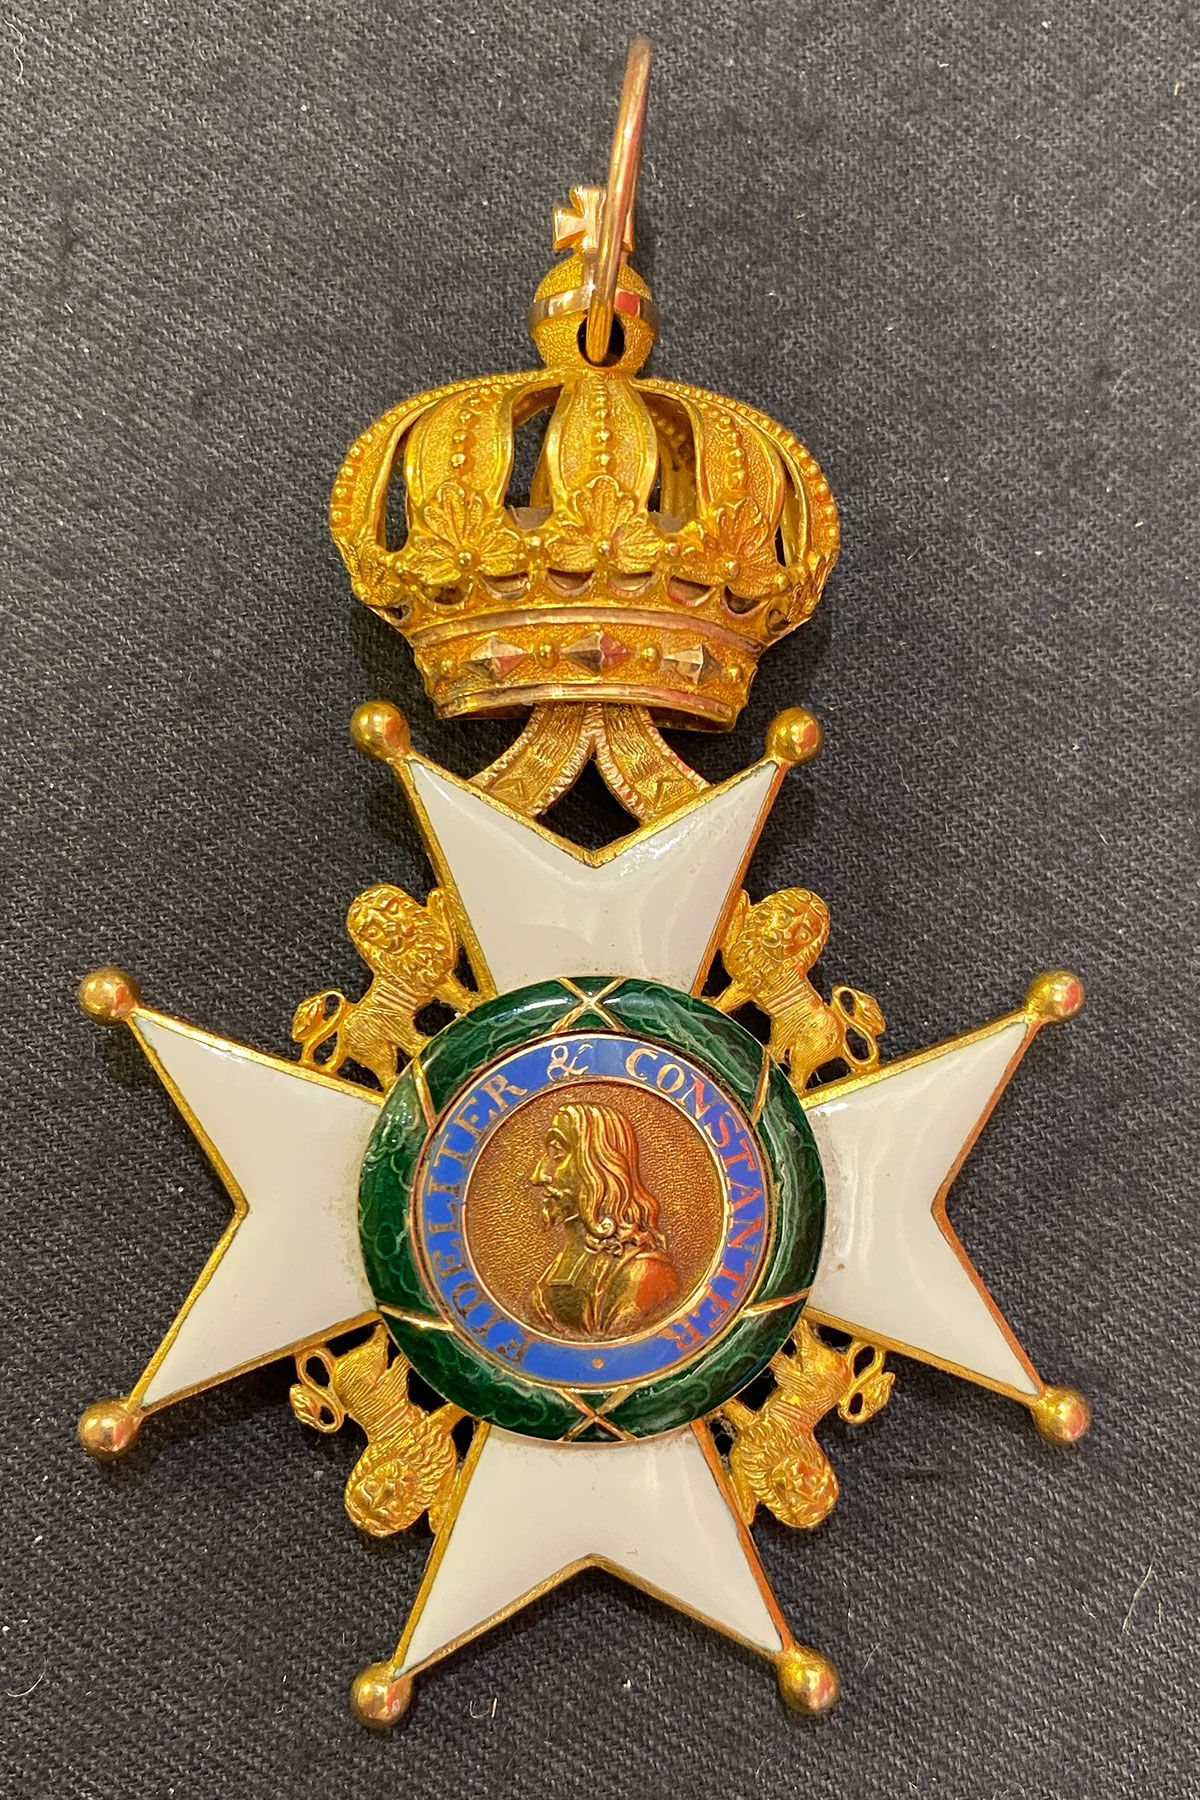 Null Germany, Duchy of Saxony - Order of the House of Ernestine, founded in 1833&hellip;